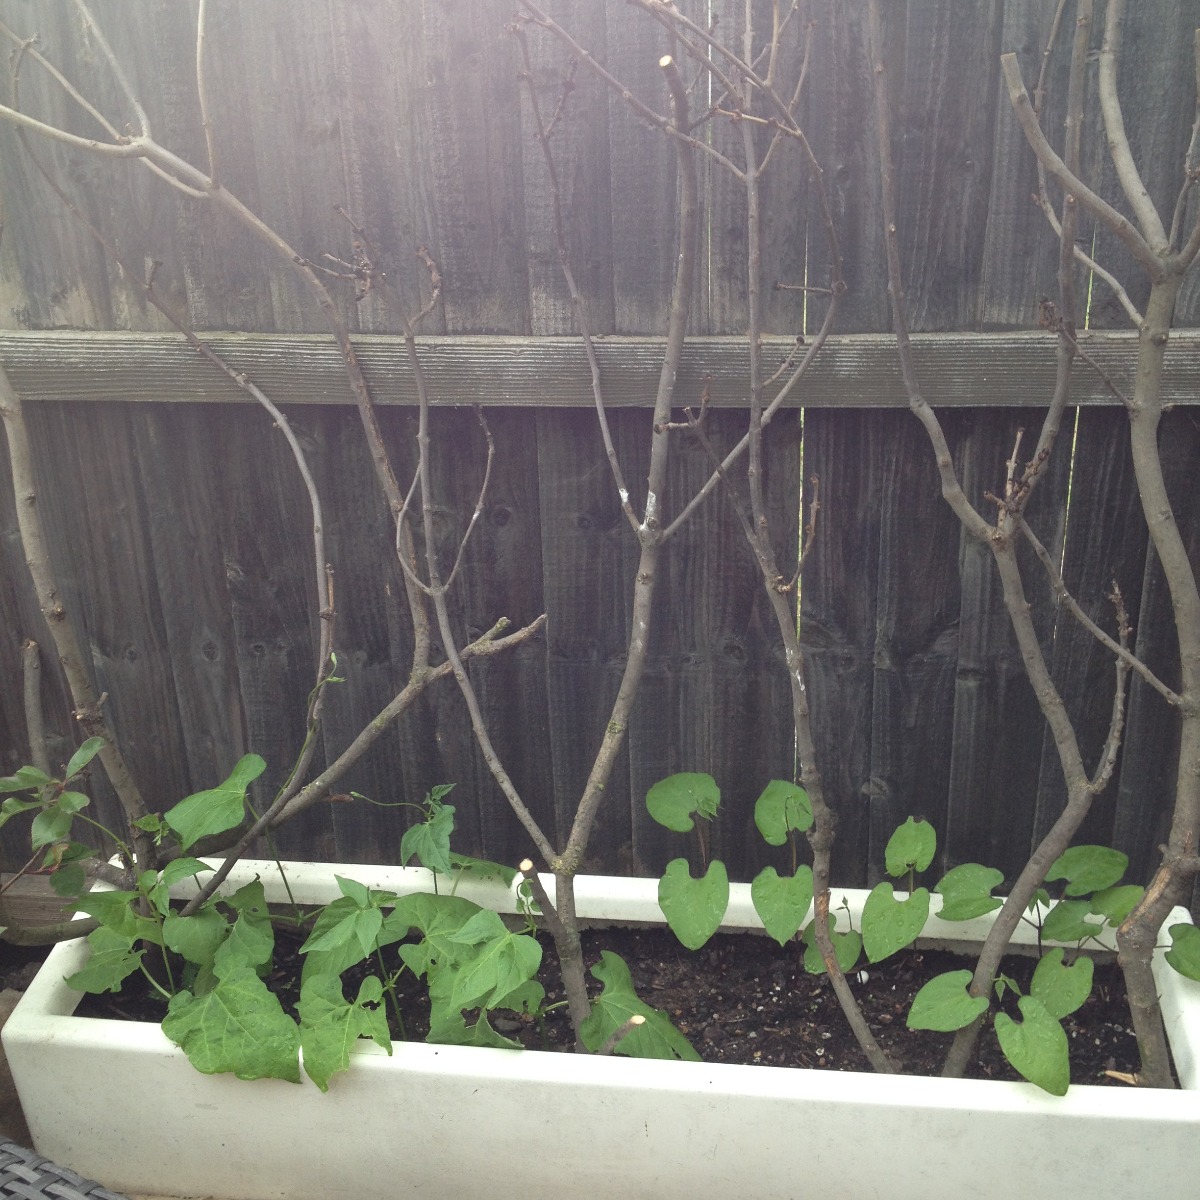 Growing beans in a trough